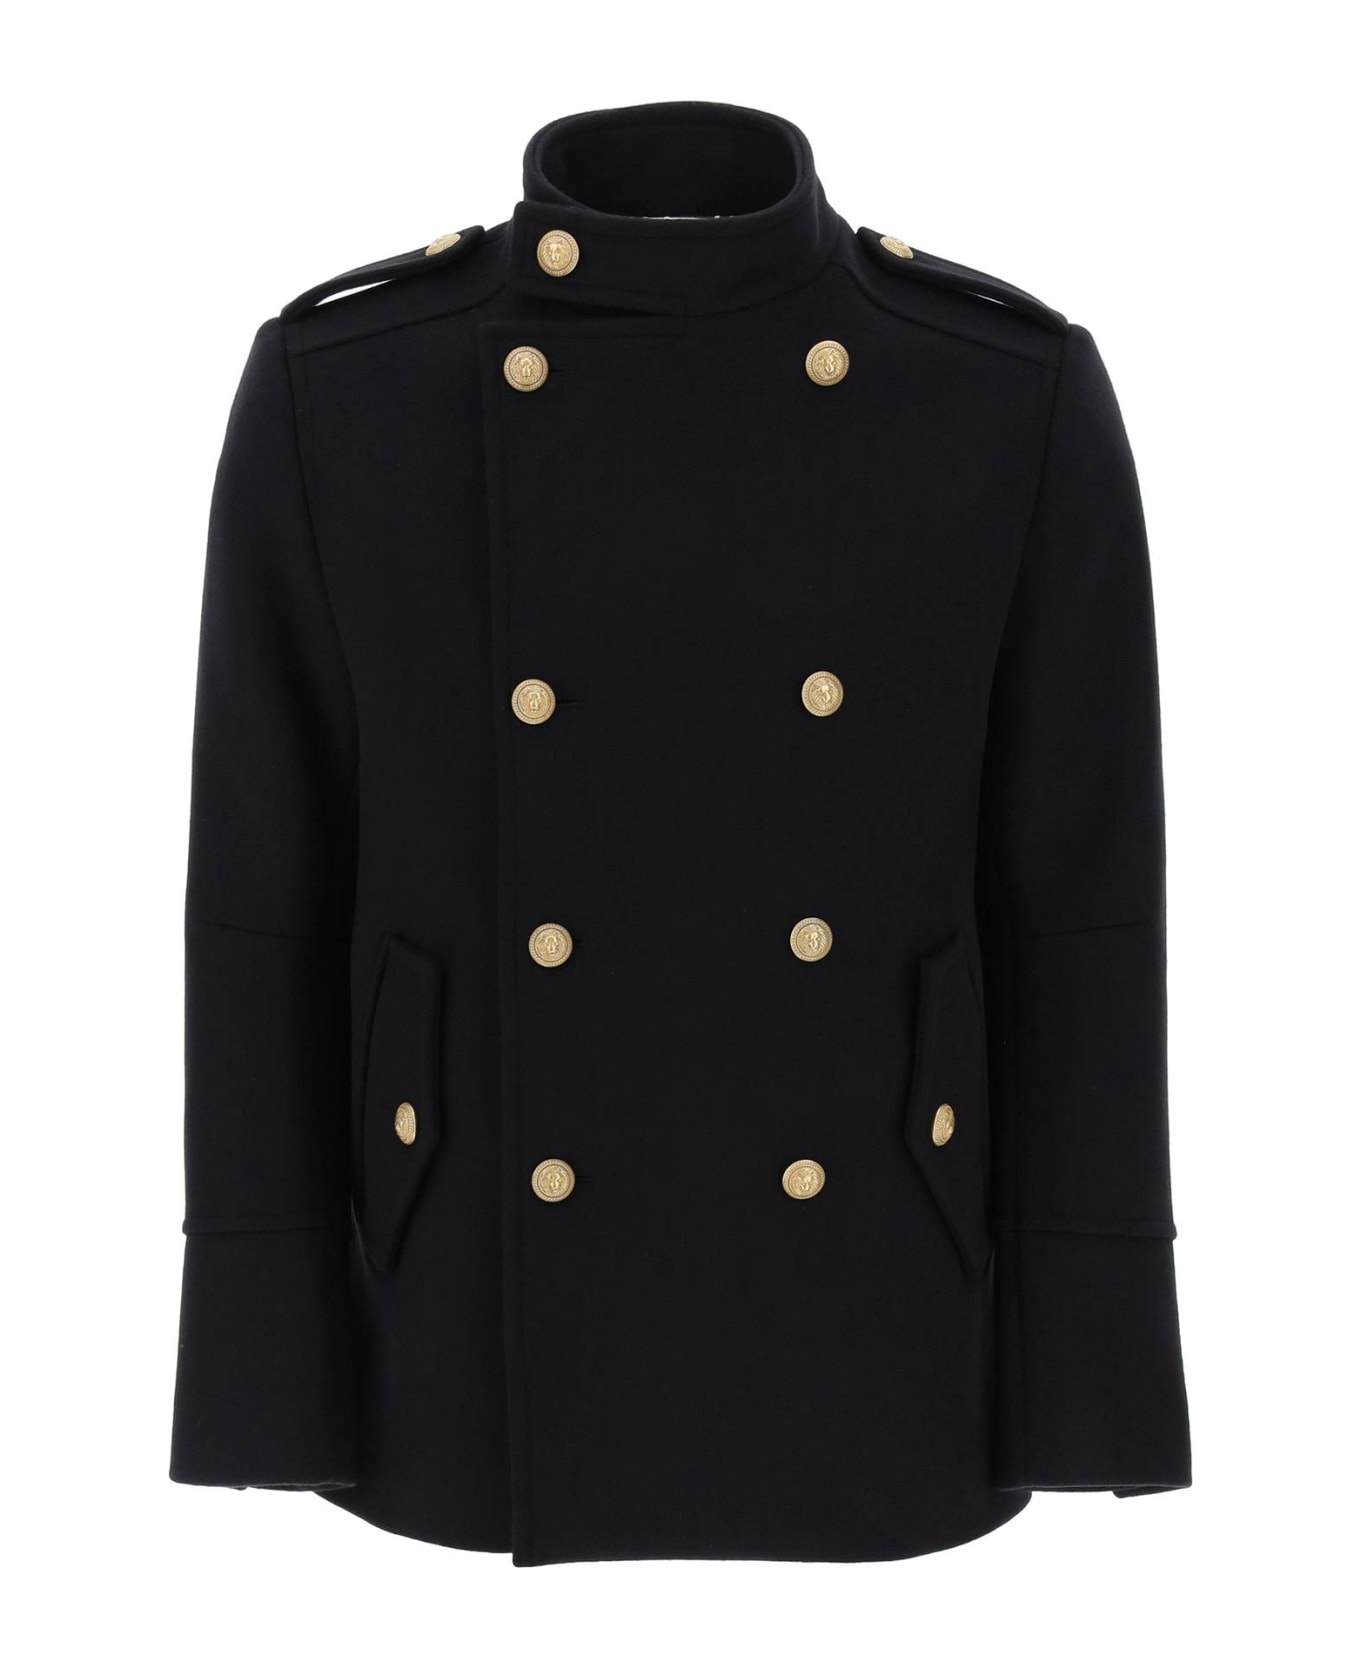 Balmain Double-breasted Peacoat With Embossed Buttons - Black コート